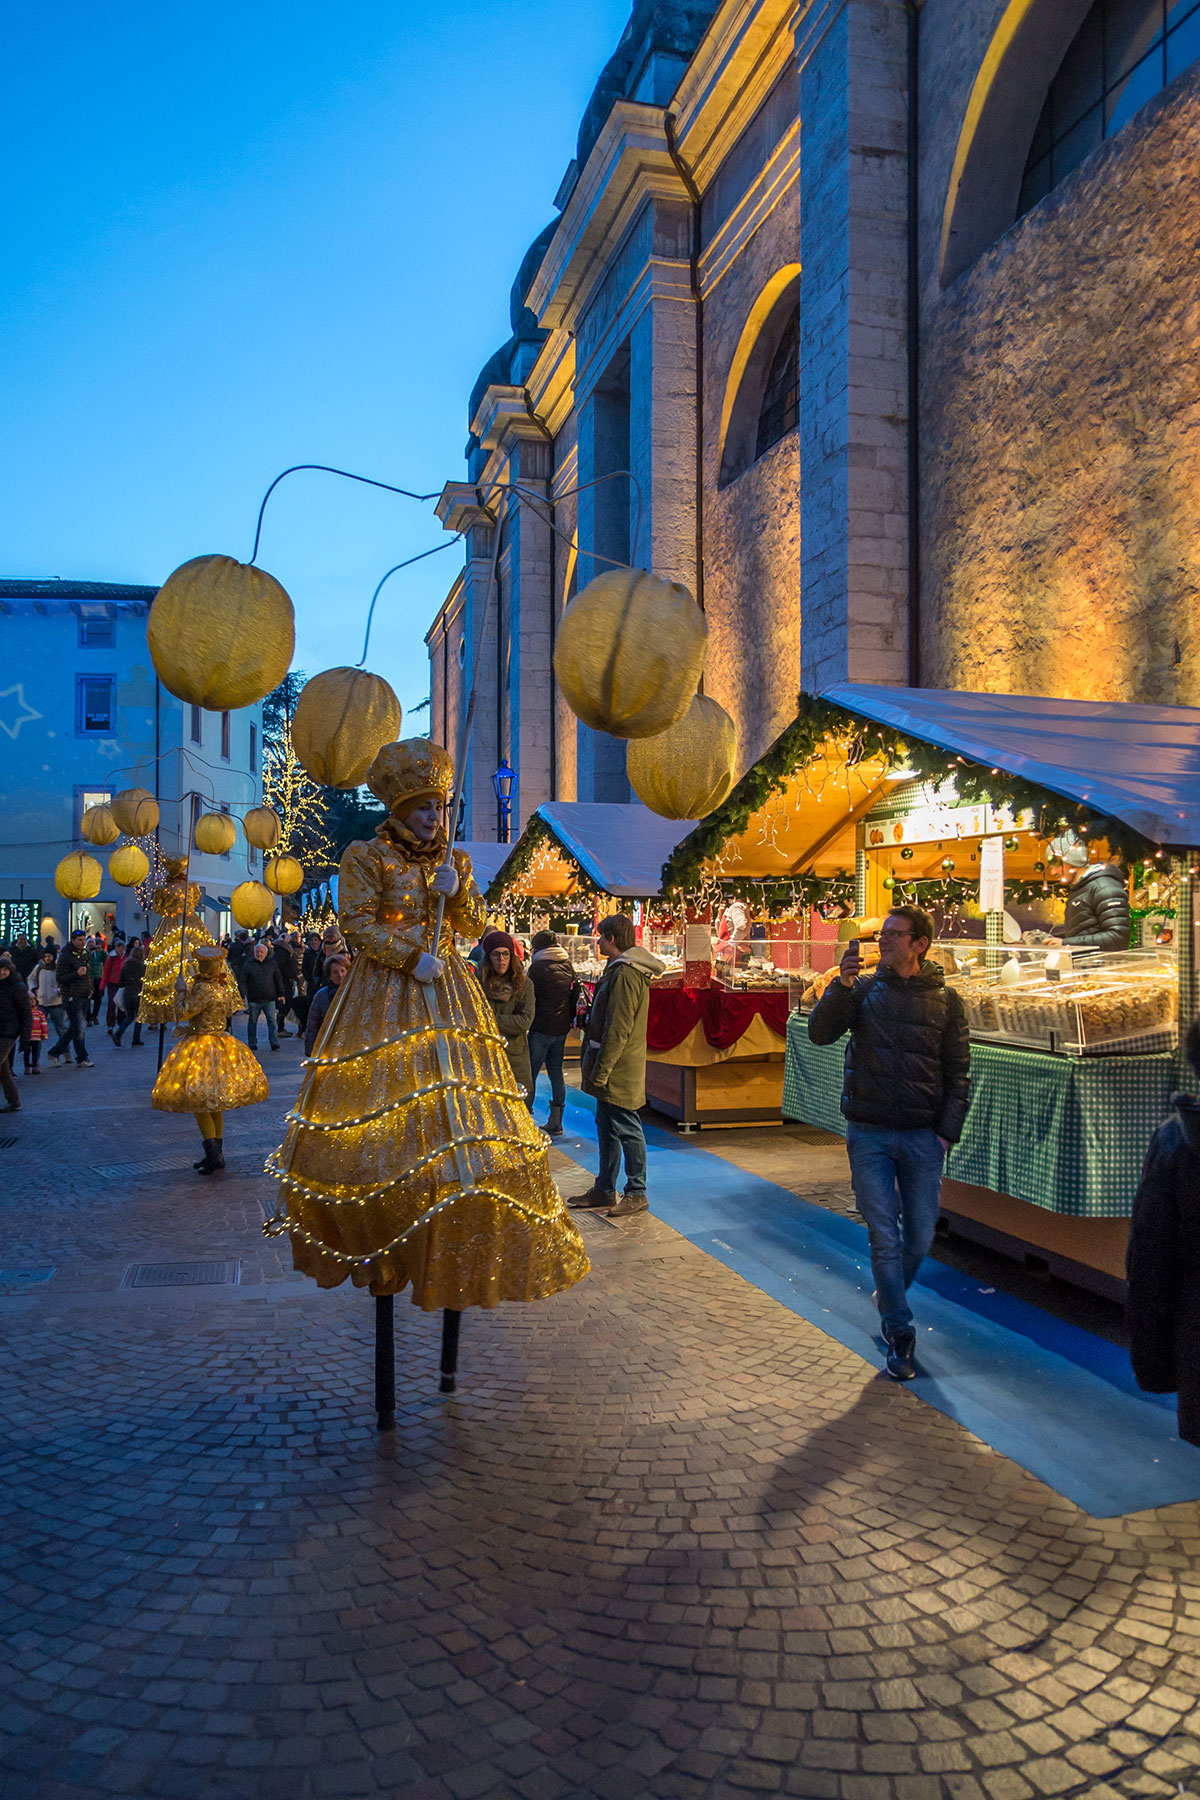 Christmas market in Arco with street performers in stilts and lanterns